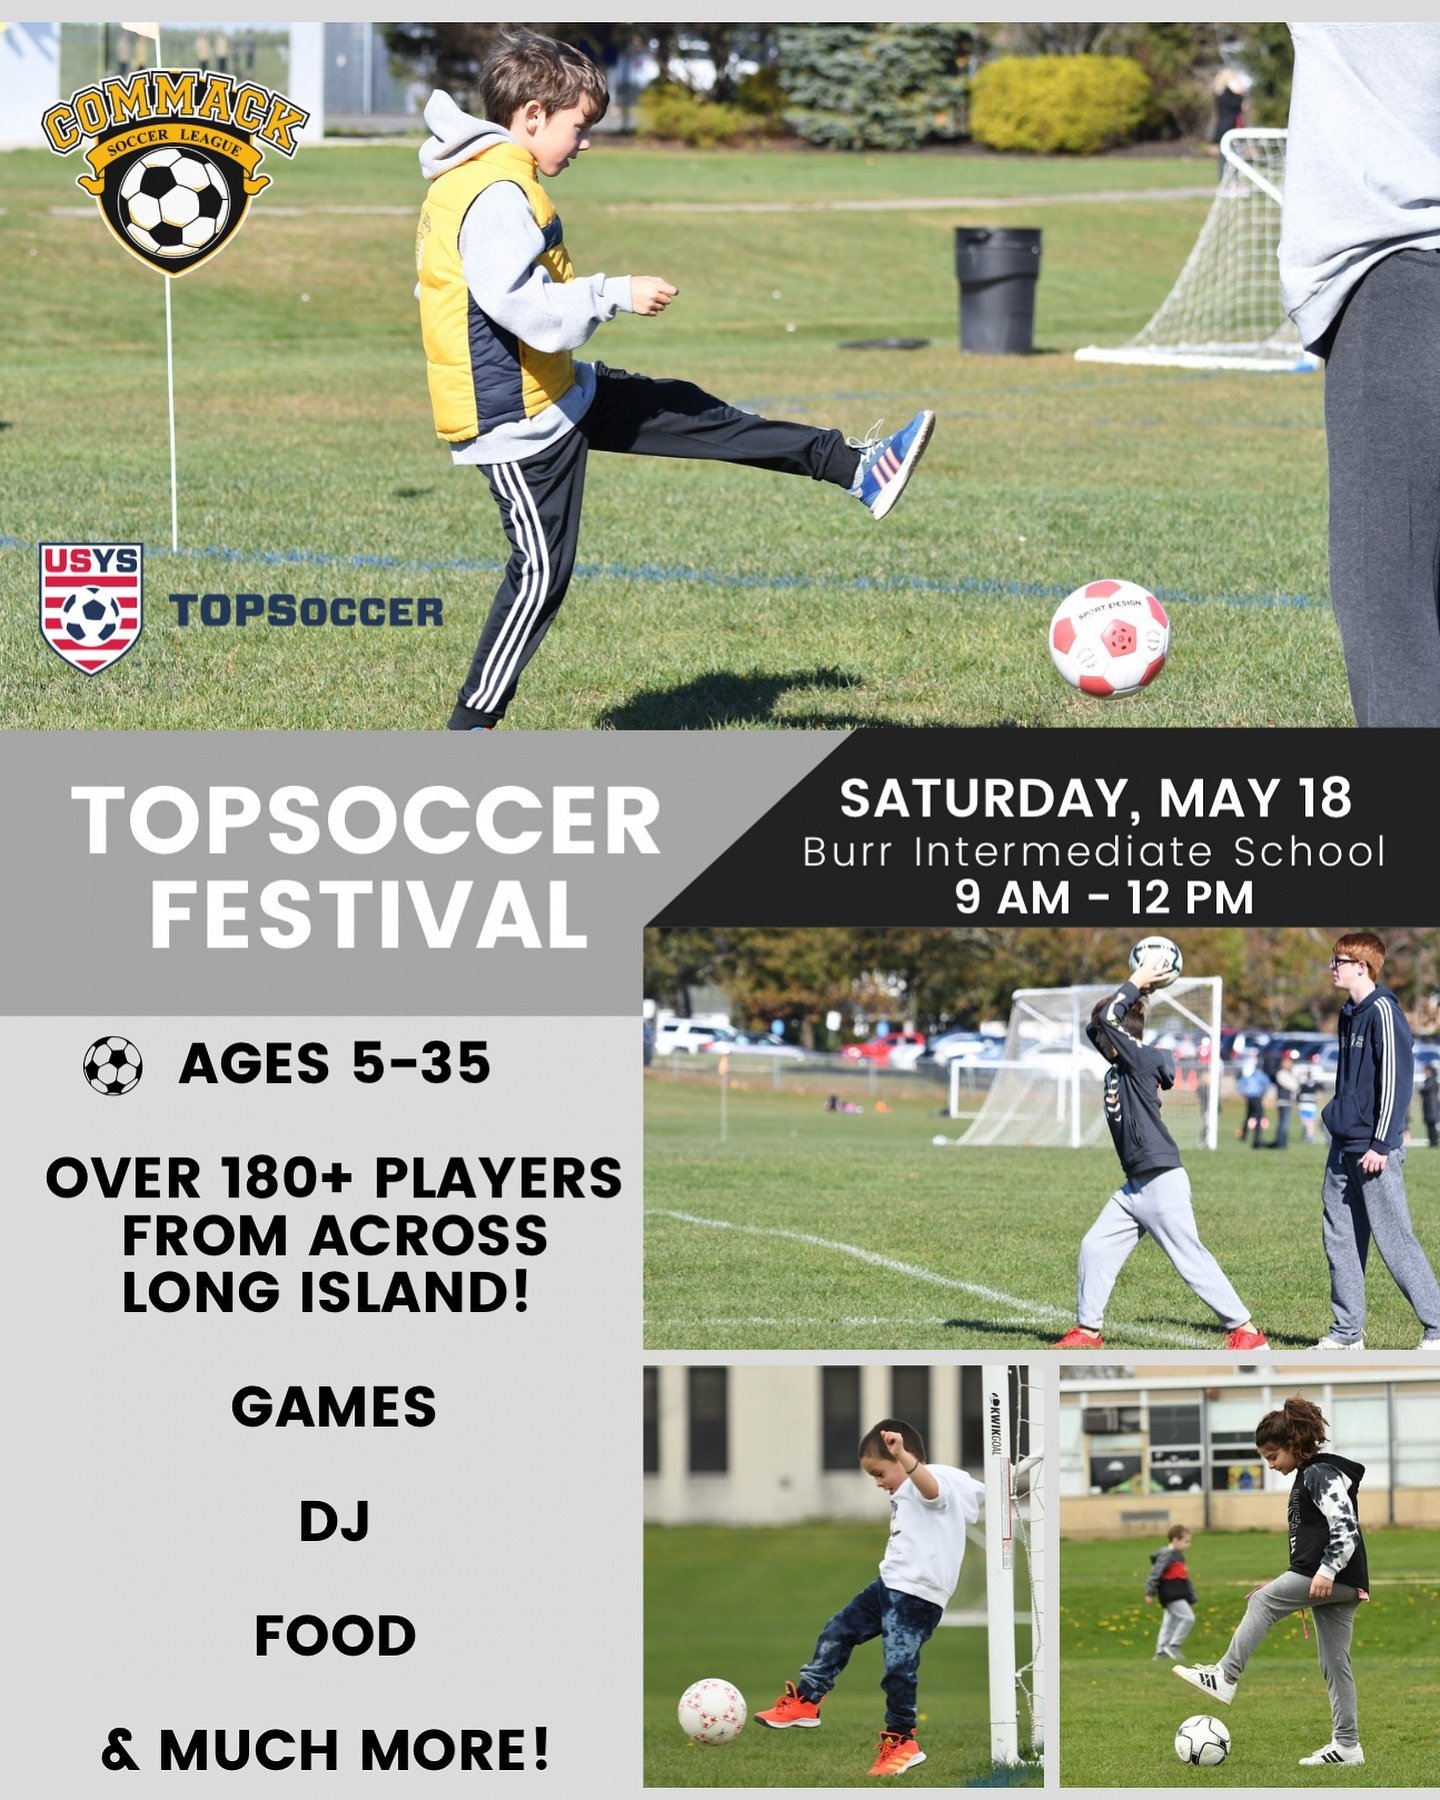 Join us tomorrow, May 18 for our annual TOPSoccer festival! The festival will be held from 9-12 at Burr and will feature players of all ages from all across the island. It will be a fun day and we hope to see you there! ⚽️ #CommackSoccer #CommackSocc